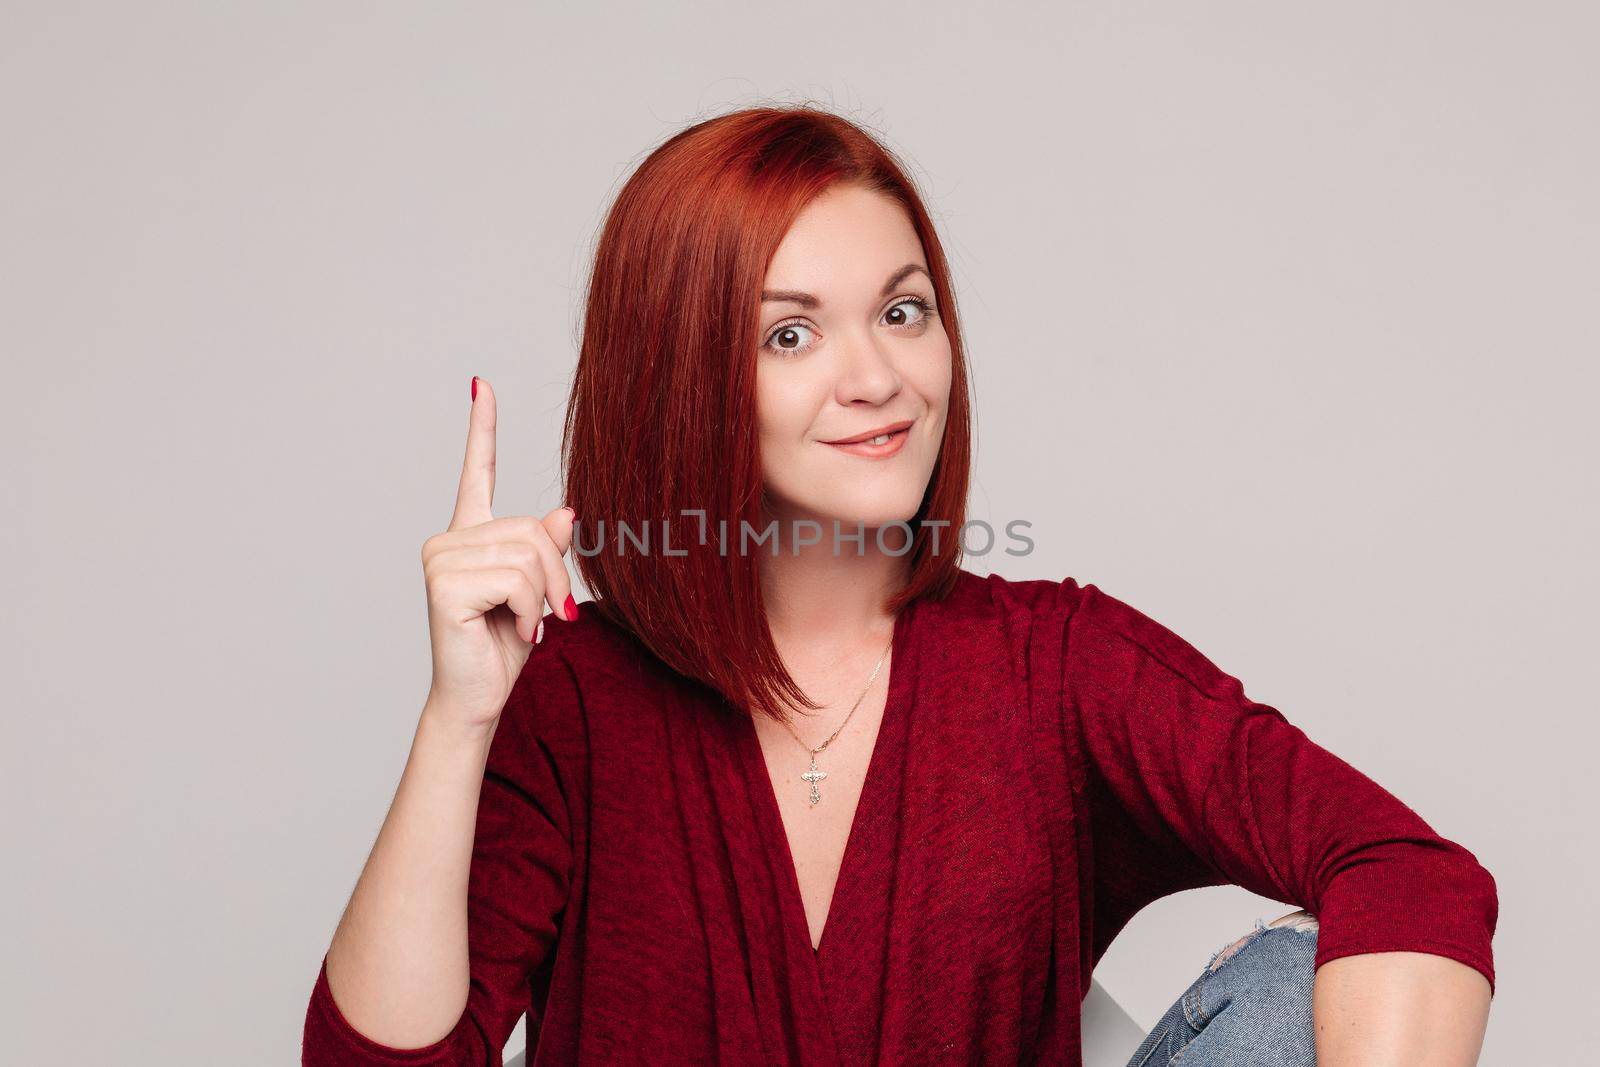 Portrait of young beautiful woman on gray background smiling at camera. Pretty red haired girl in bordo blouse and jeans thinking about something. Concept of new idea and thinking.